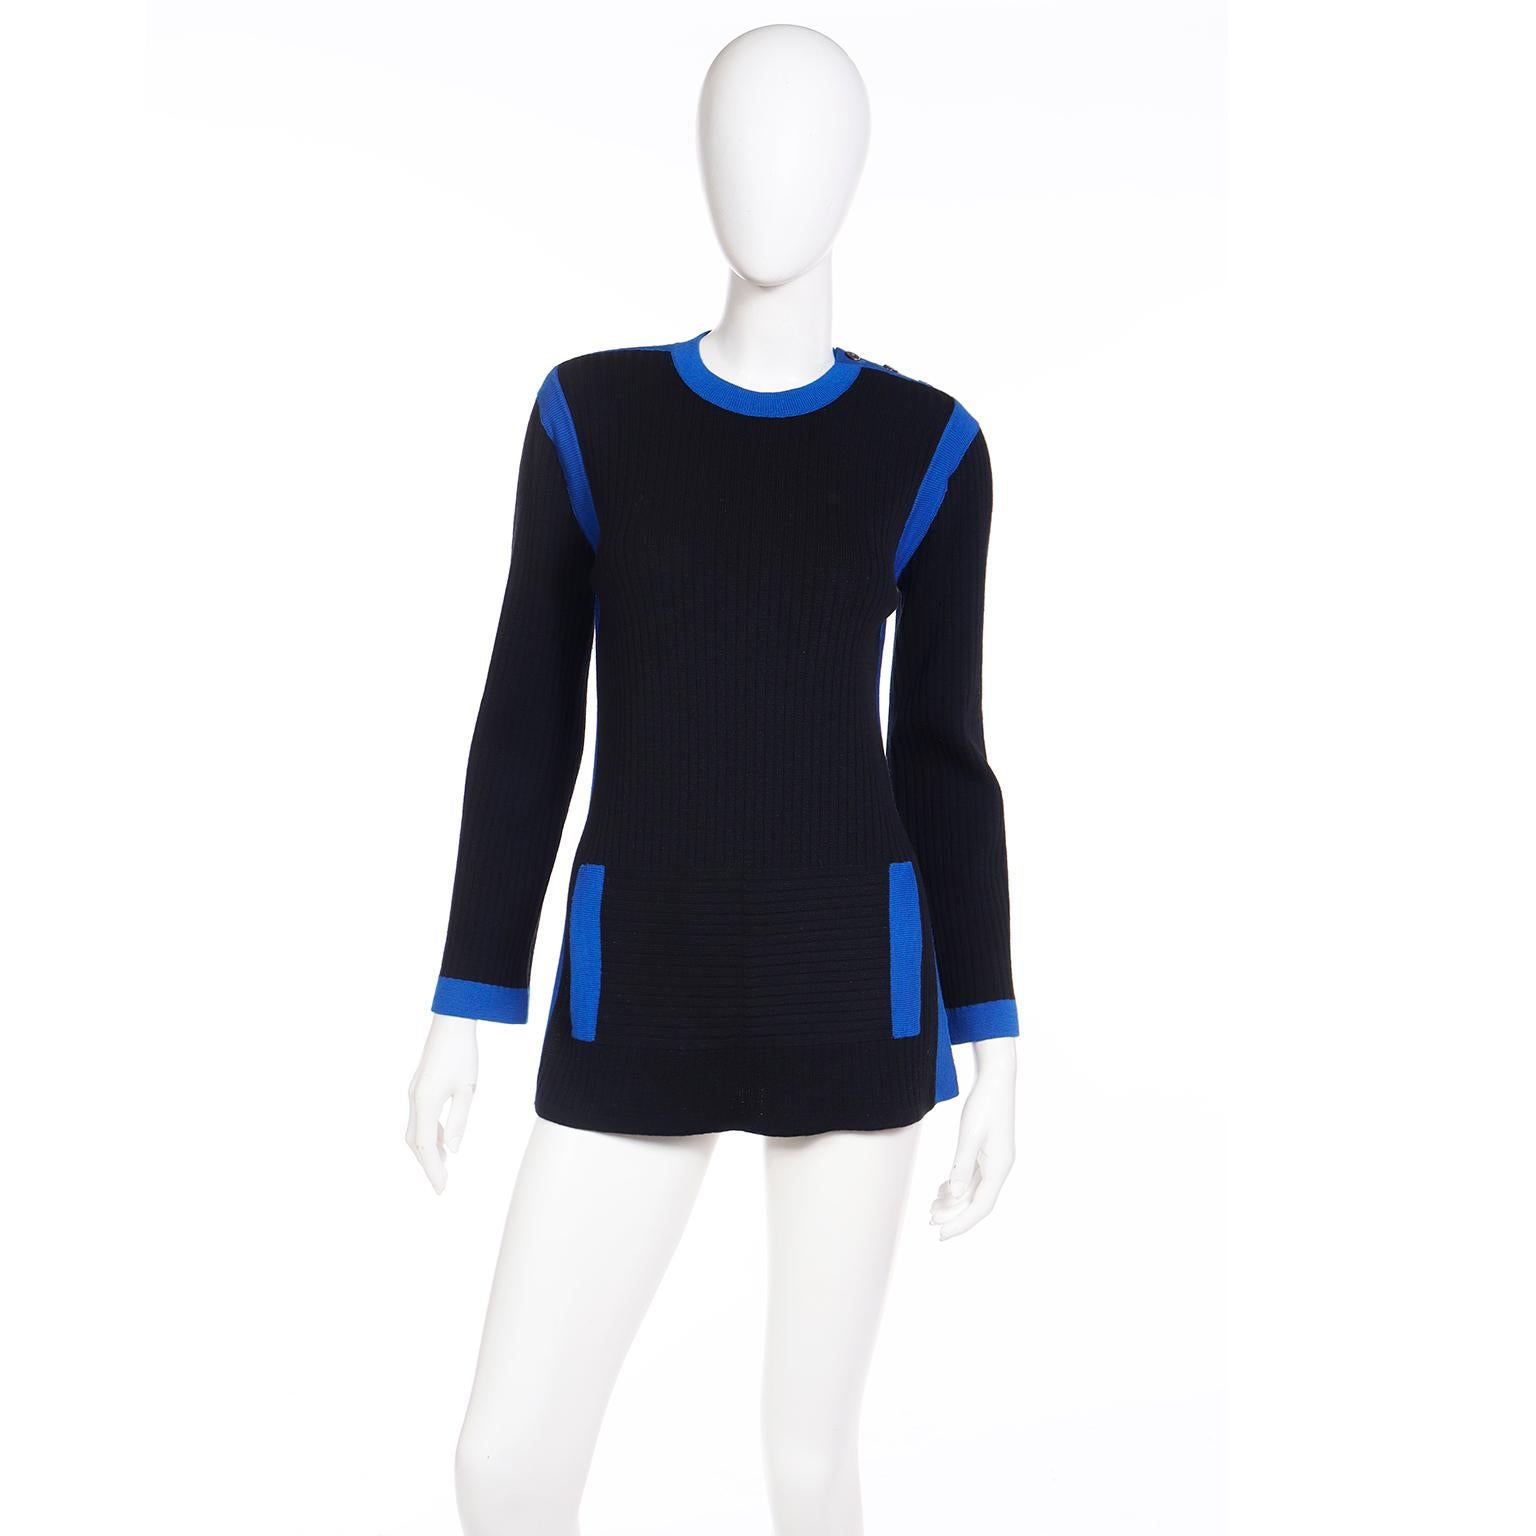 This is a YSL 1980's vintage pullover sweater from Yves Saint Laurent in black ribbed wool knit with lovely bright blue trim. This long top has slits on each side and front faux pockets. There are three buttons on the shoulders.
Condition- middle